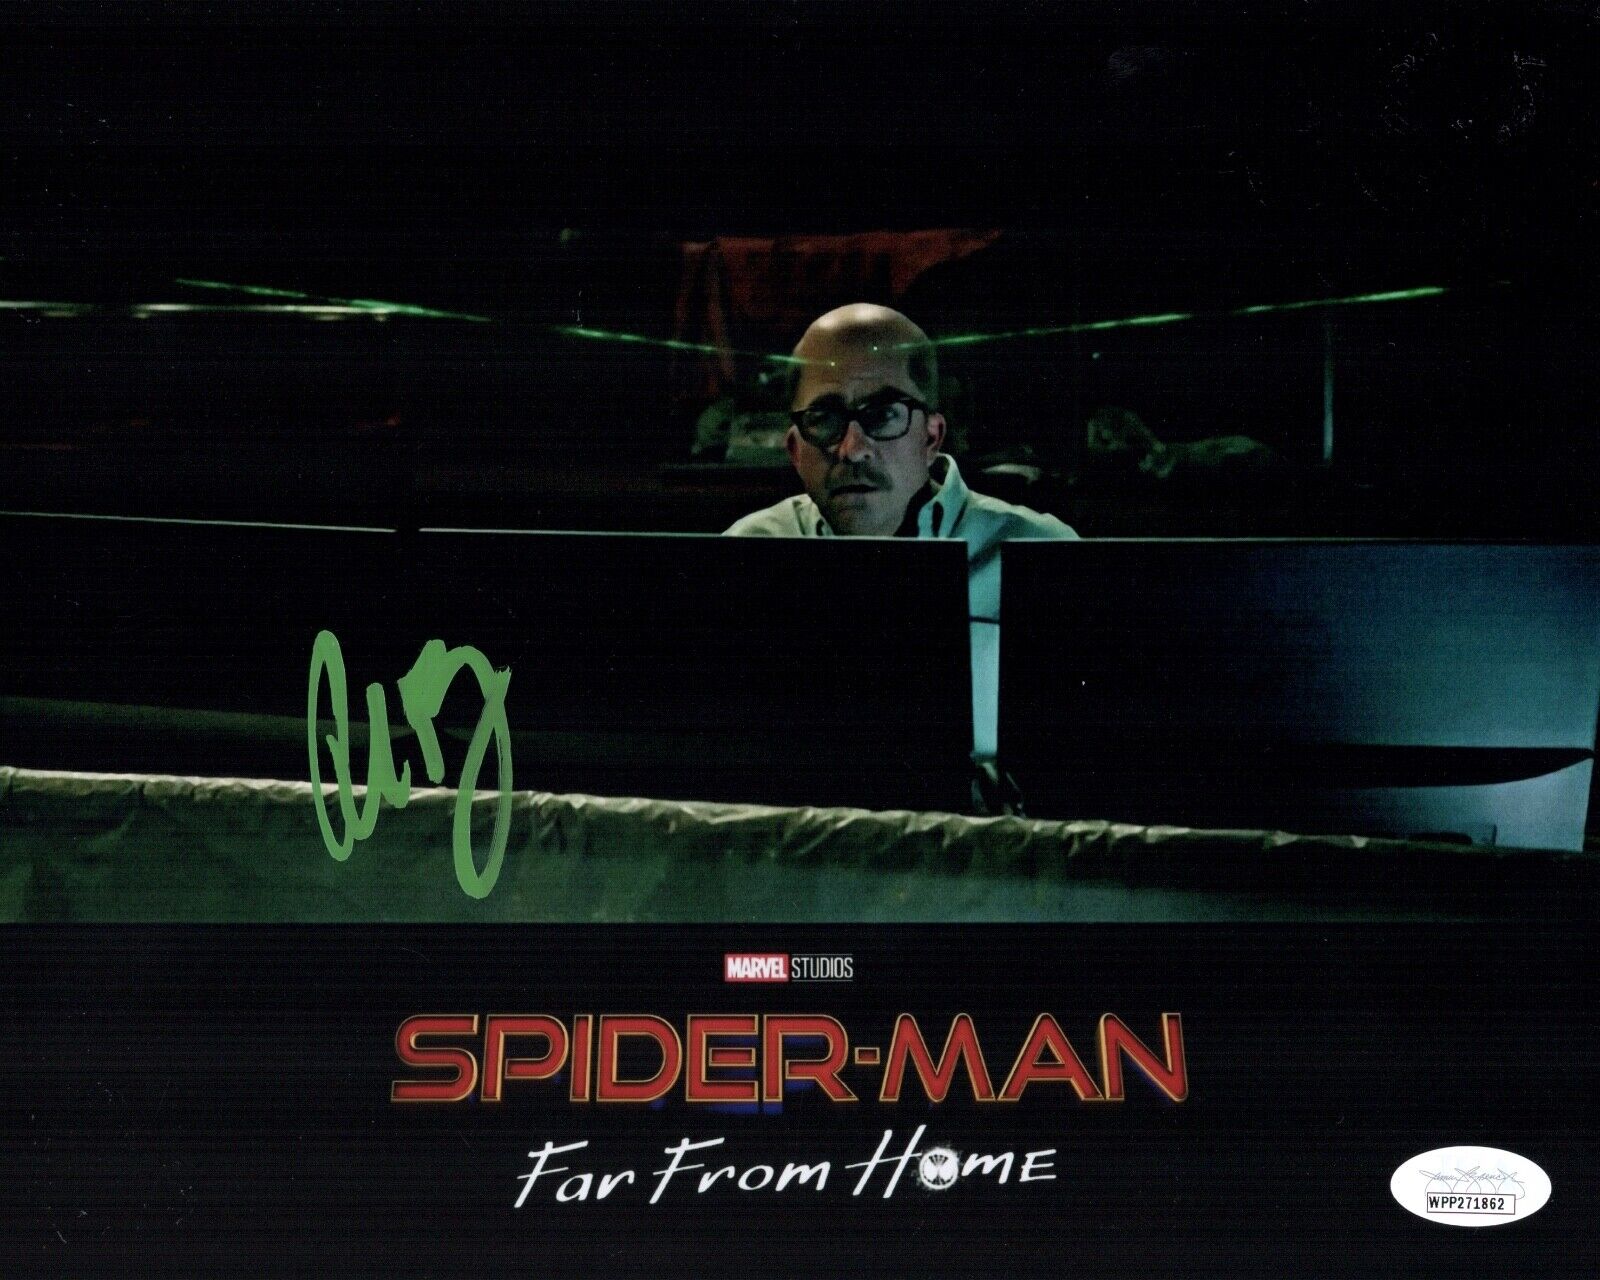 PETER BILLINGSLEY Signed 8x10 Spider Man Far From Home Photo Poster painting WITNESS JSA COA